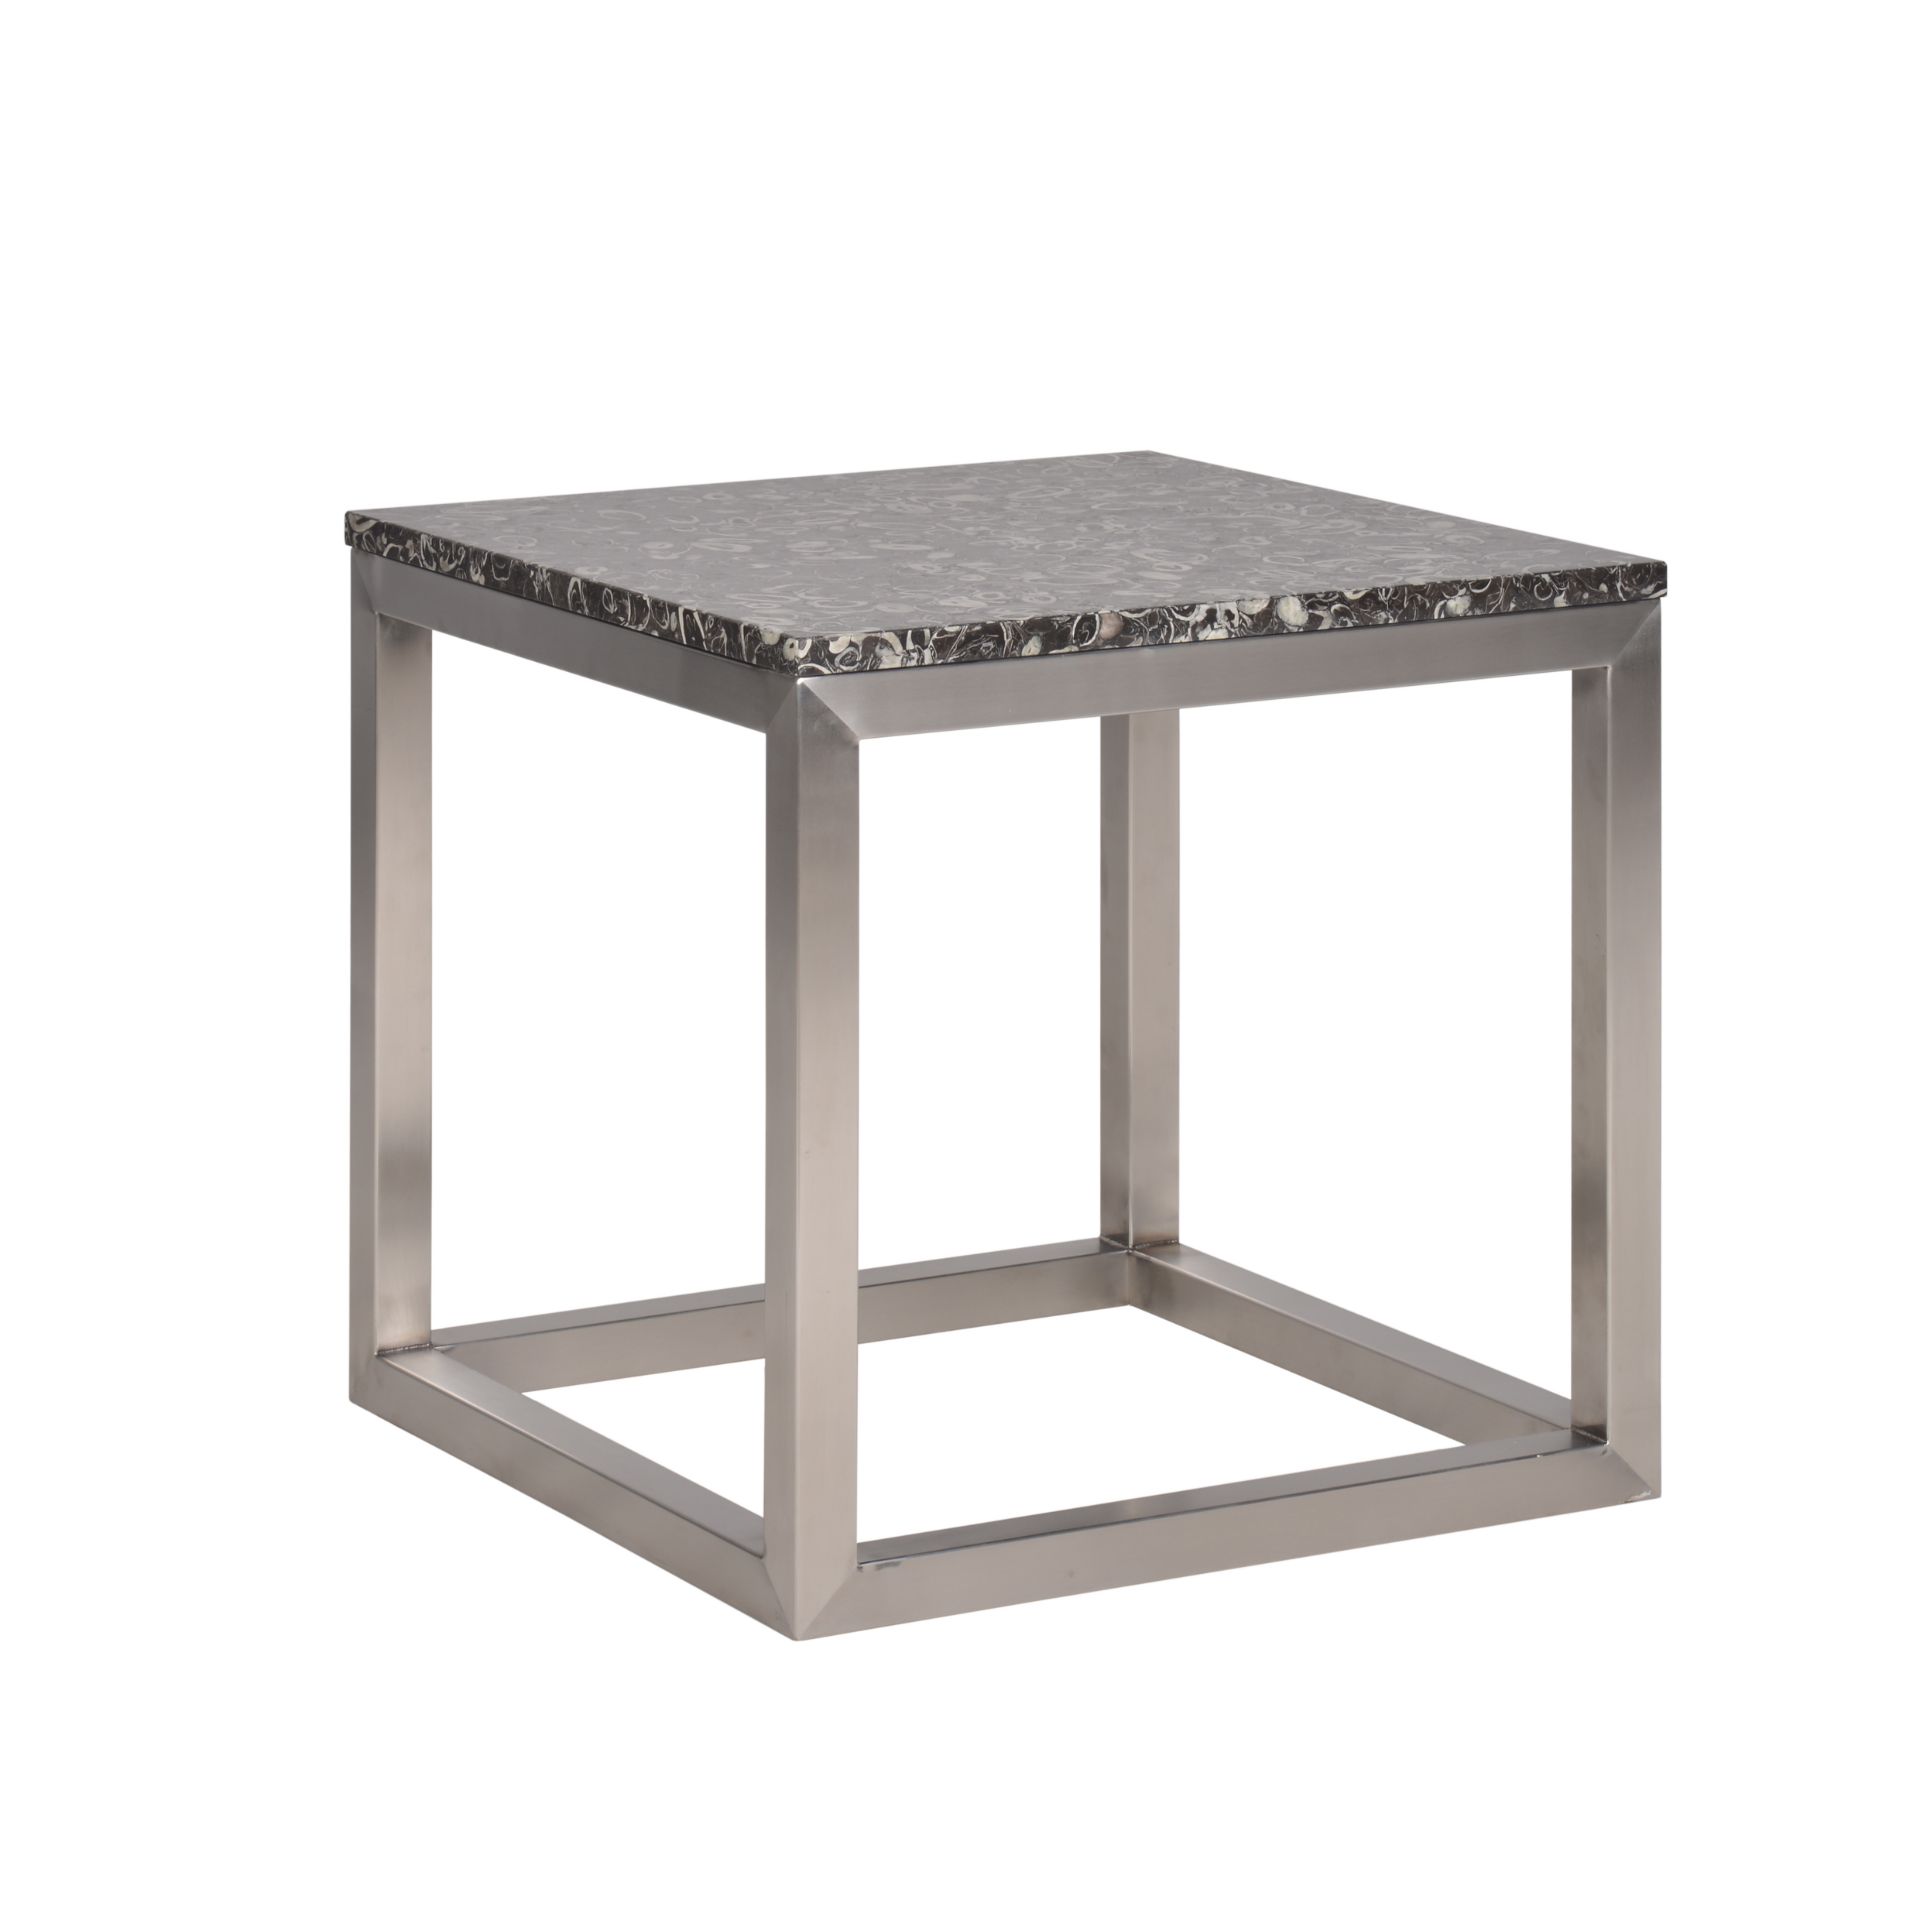 Modern Side Table Fossil Stone & Brushed Steel 60x60x60cm RRP £ 996